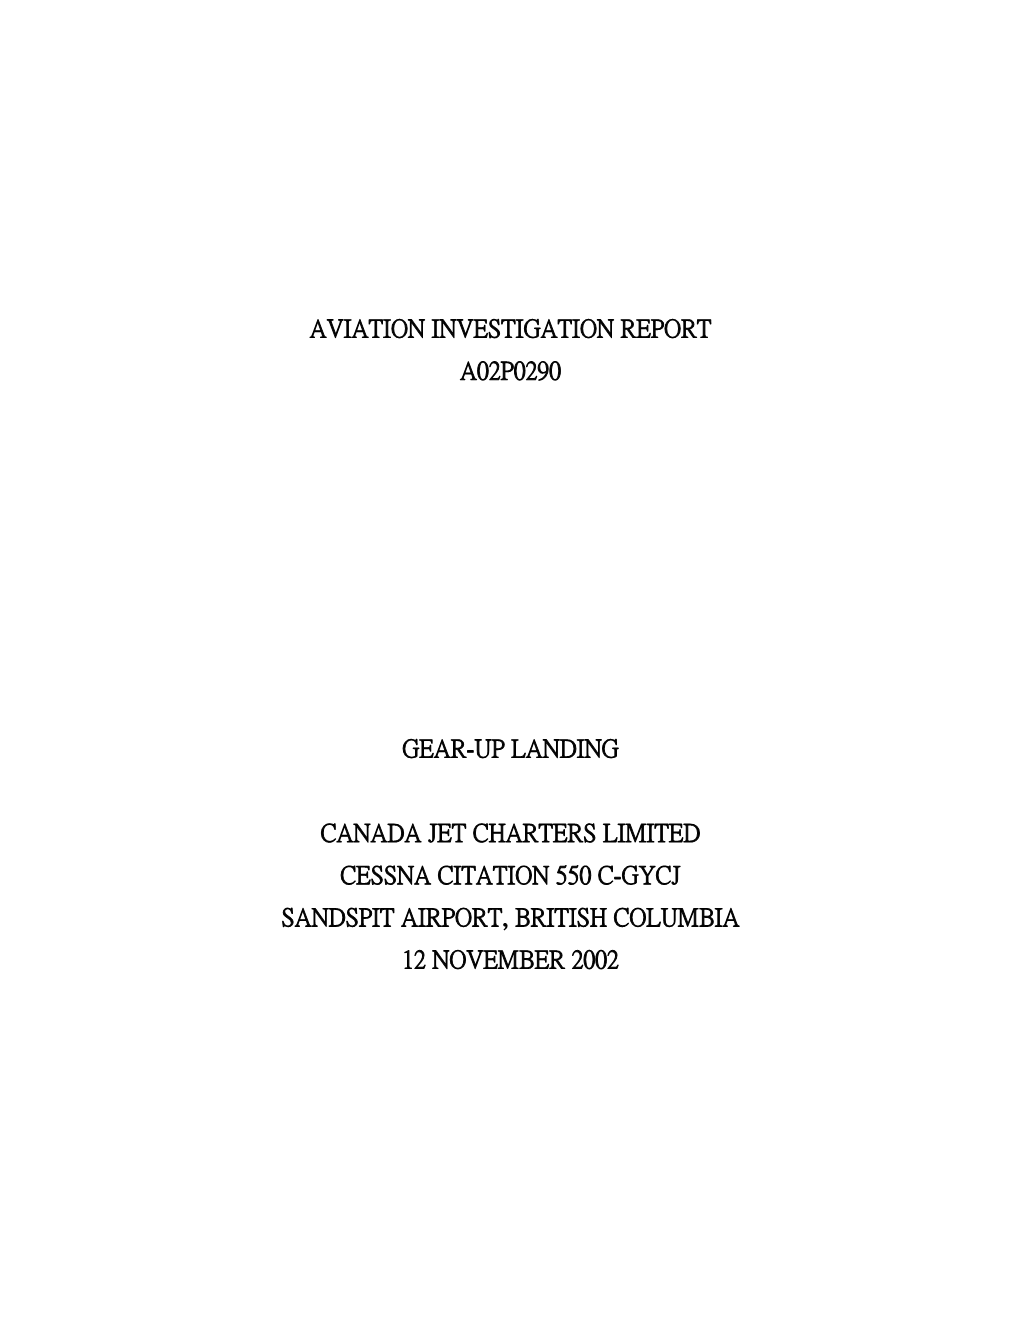 Aviation Investigation Report A02p0290 Gear-Up Landing Canada Jet Charters Limited Cessna Citation 550 C-Gycj Sandspit Airport